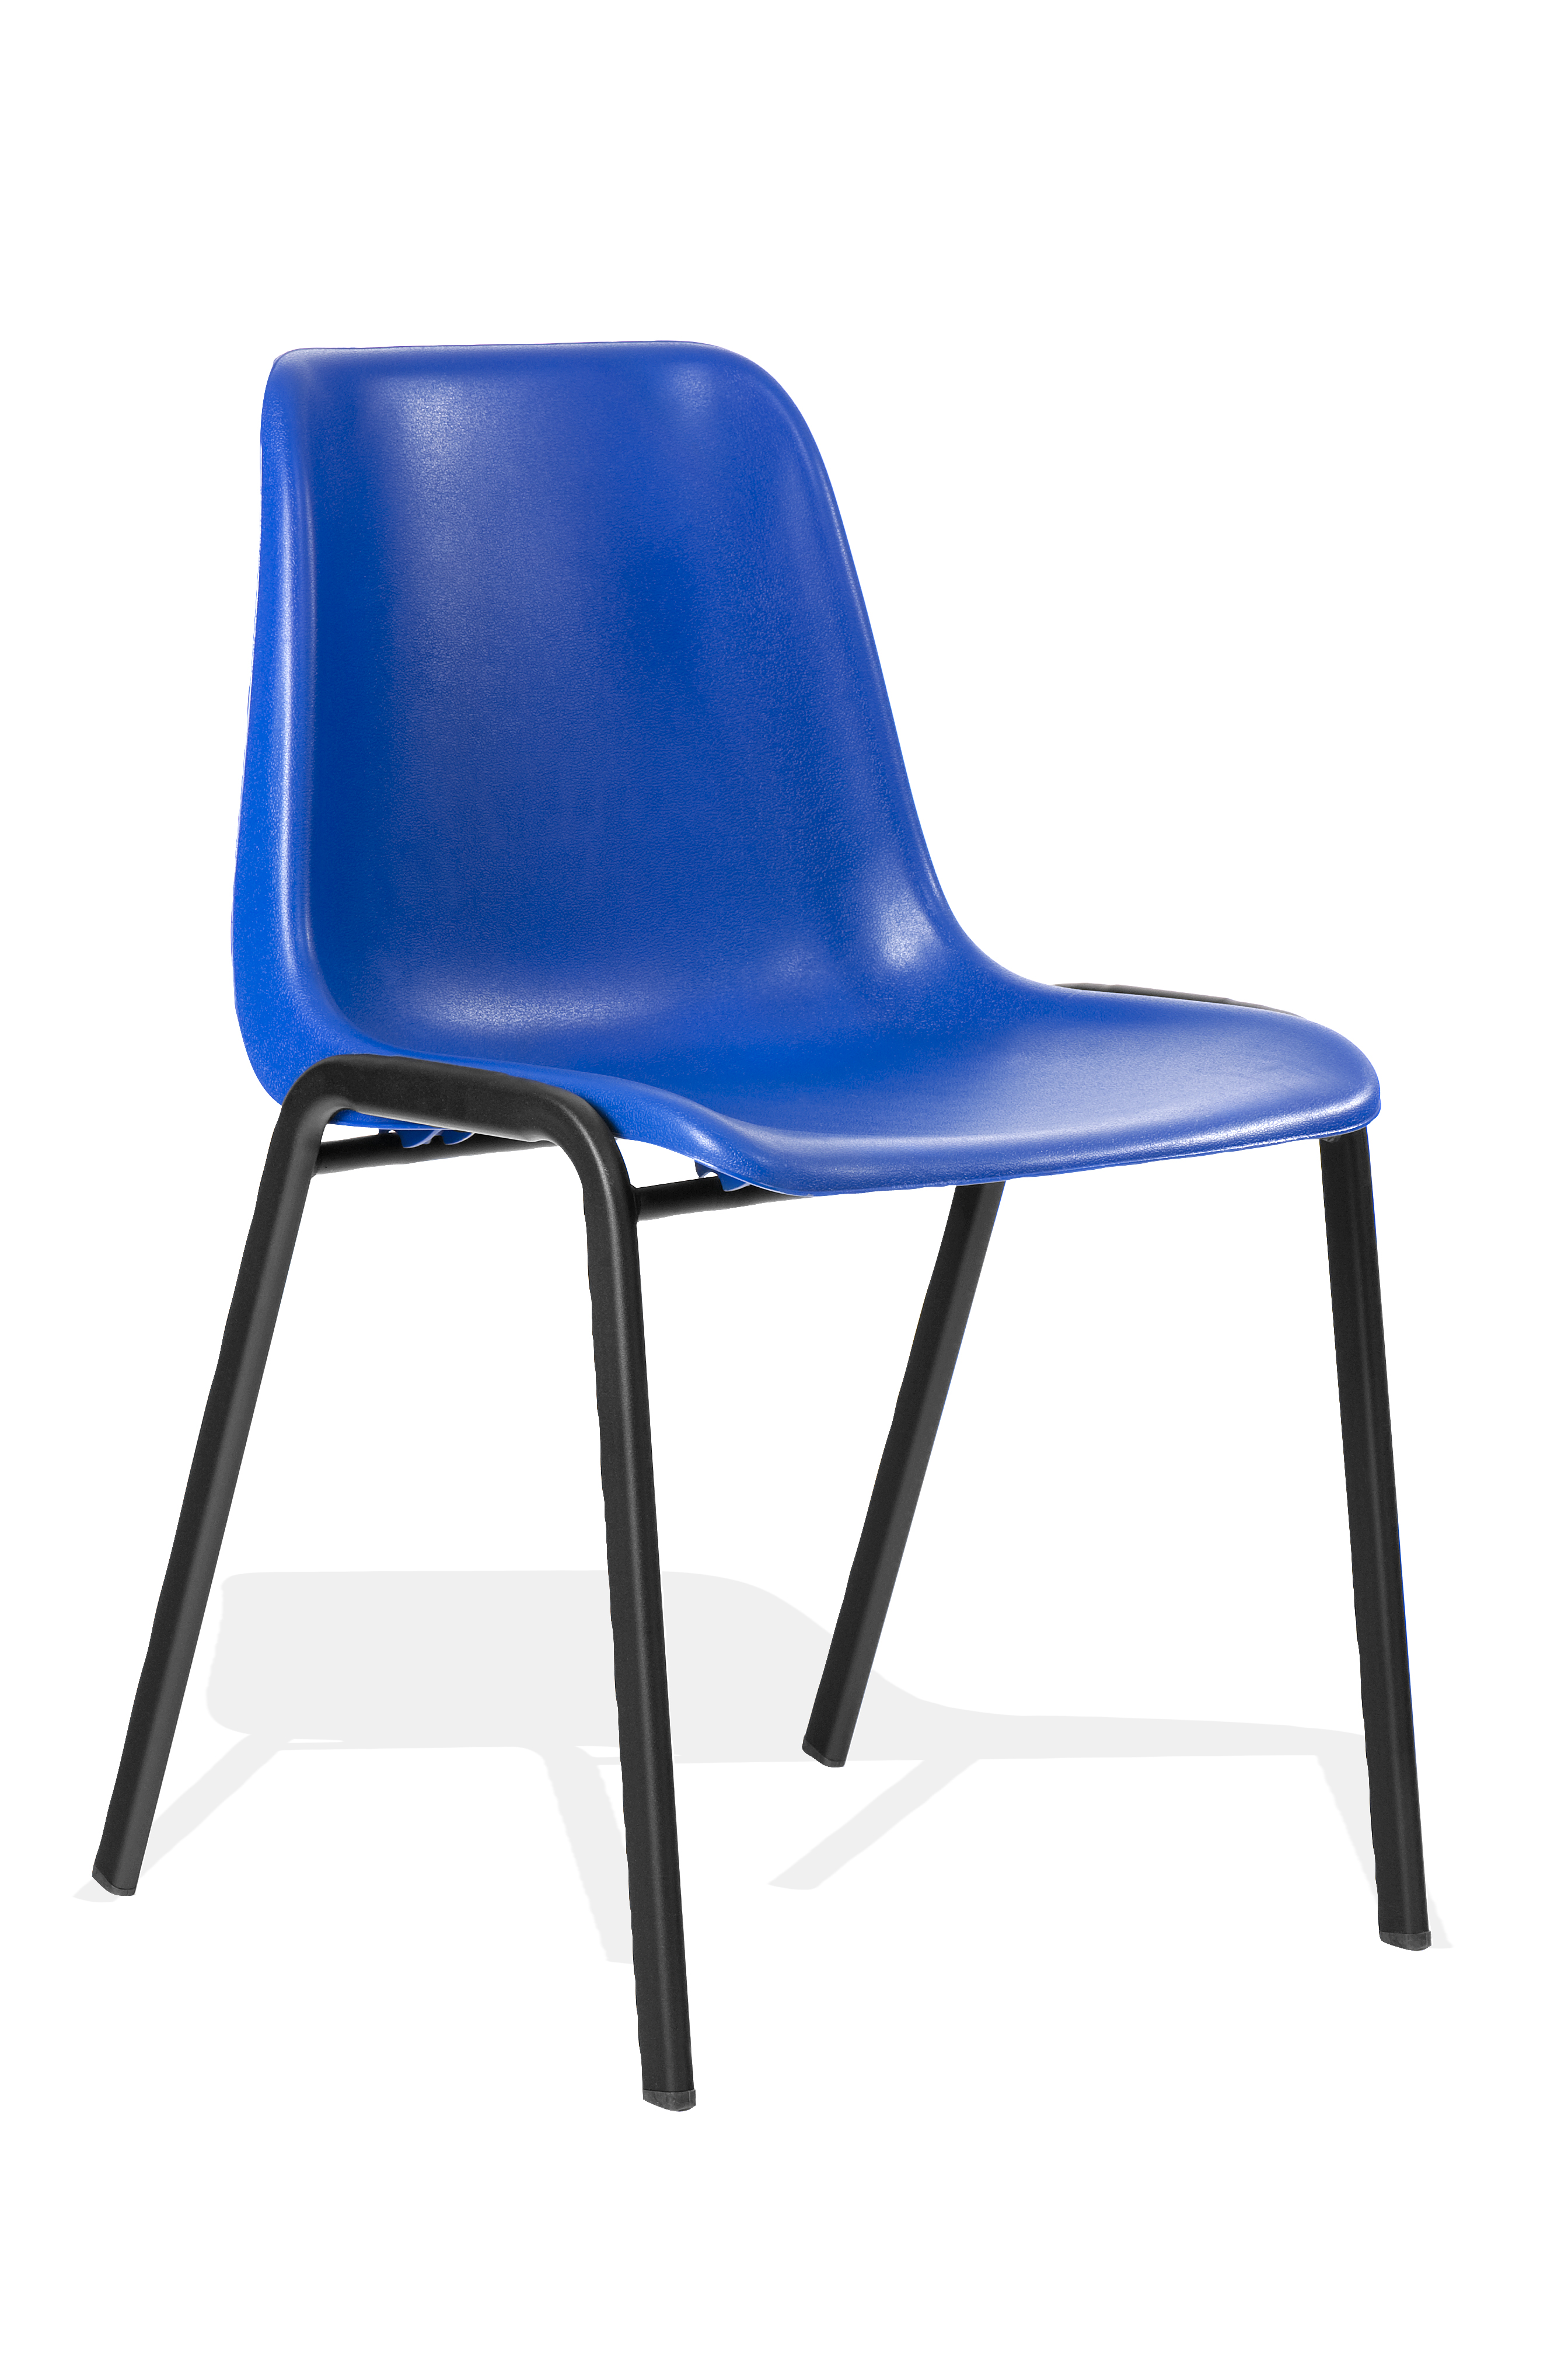 Stacking Chairs Polly Stacking Visitor Chair Blue Polypropylene BR000203